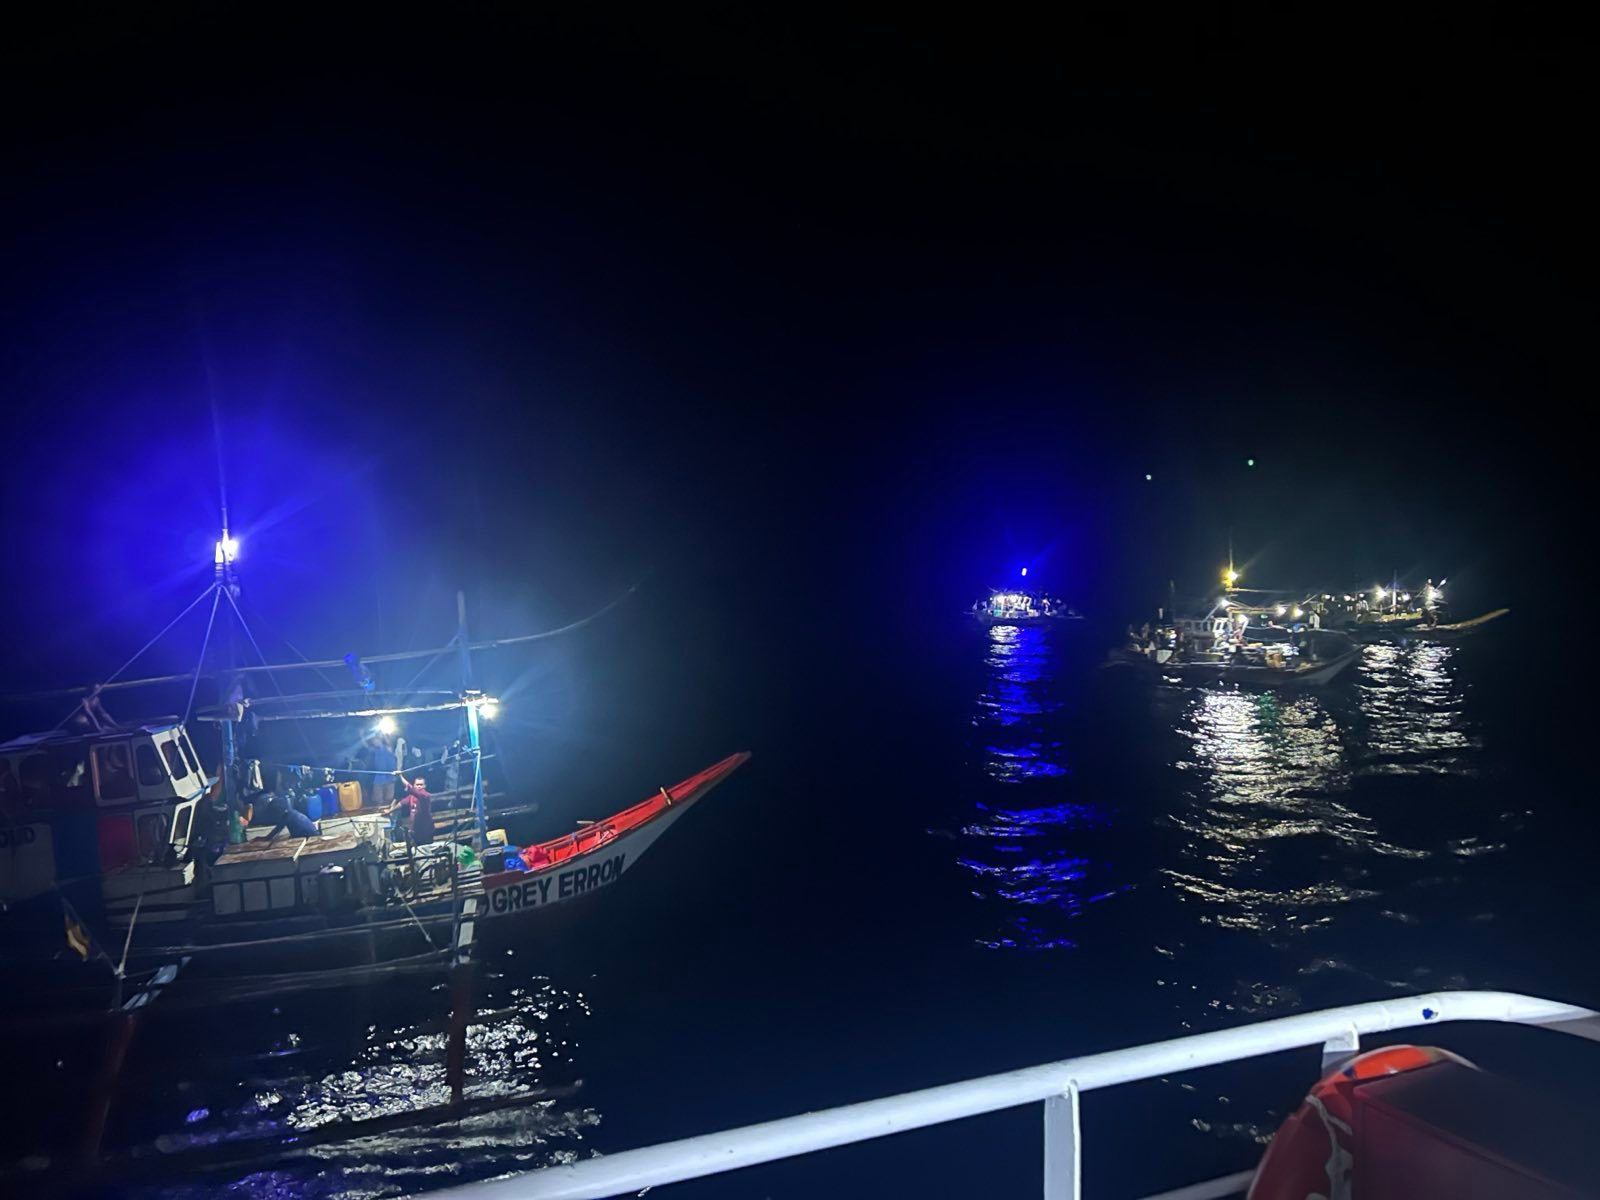 IN PHOTOS: After China’s water cannons, BFAR brings supplies to fisherfolk in Bajo de Masinloc